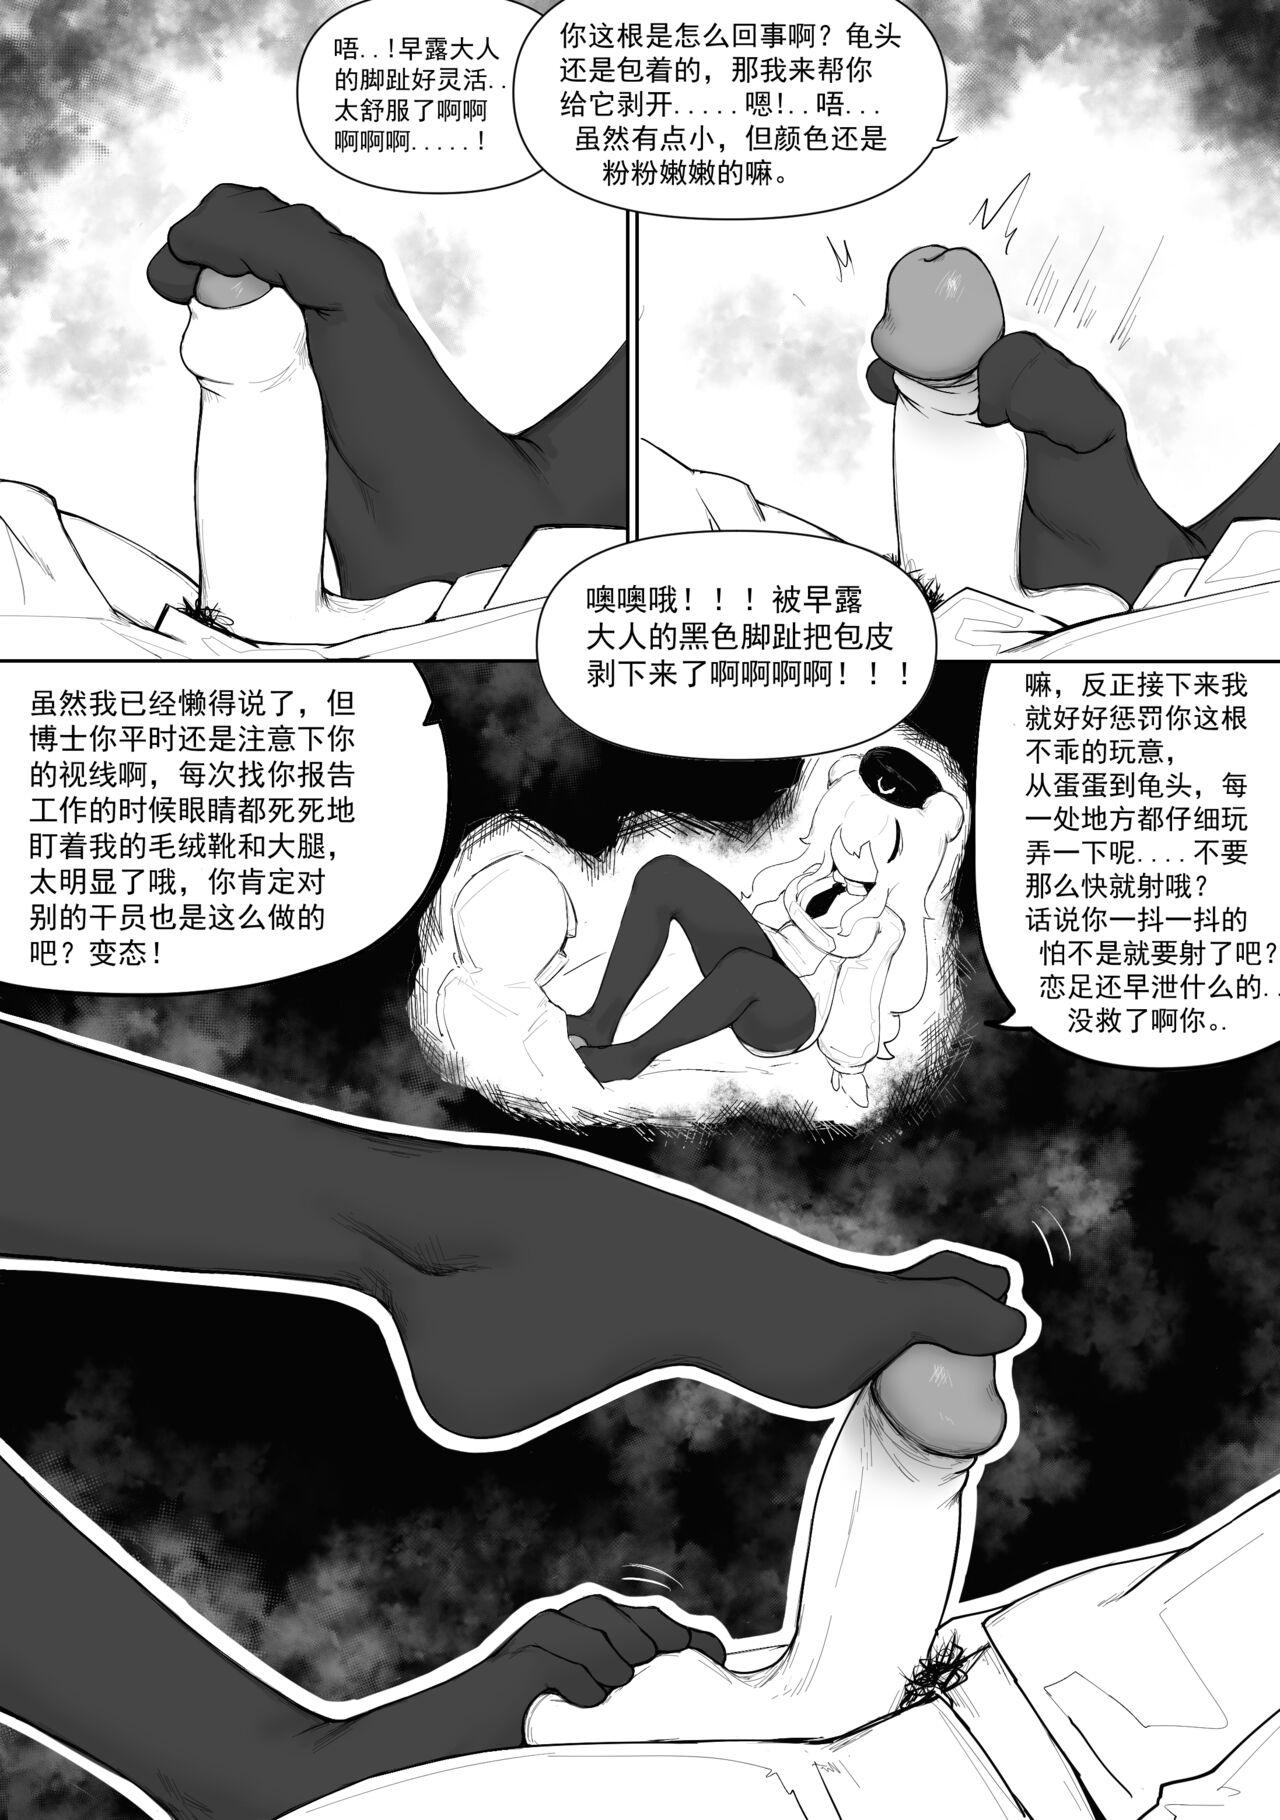 Bokep 澄澈之冰 早露 - Arknights Analfucking - Page 5